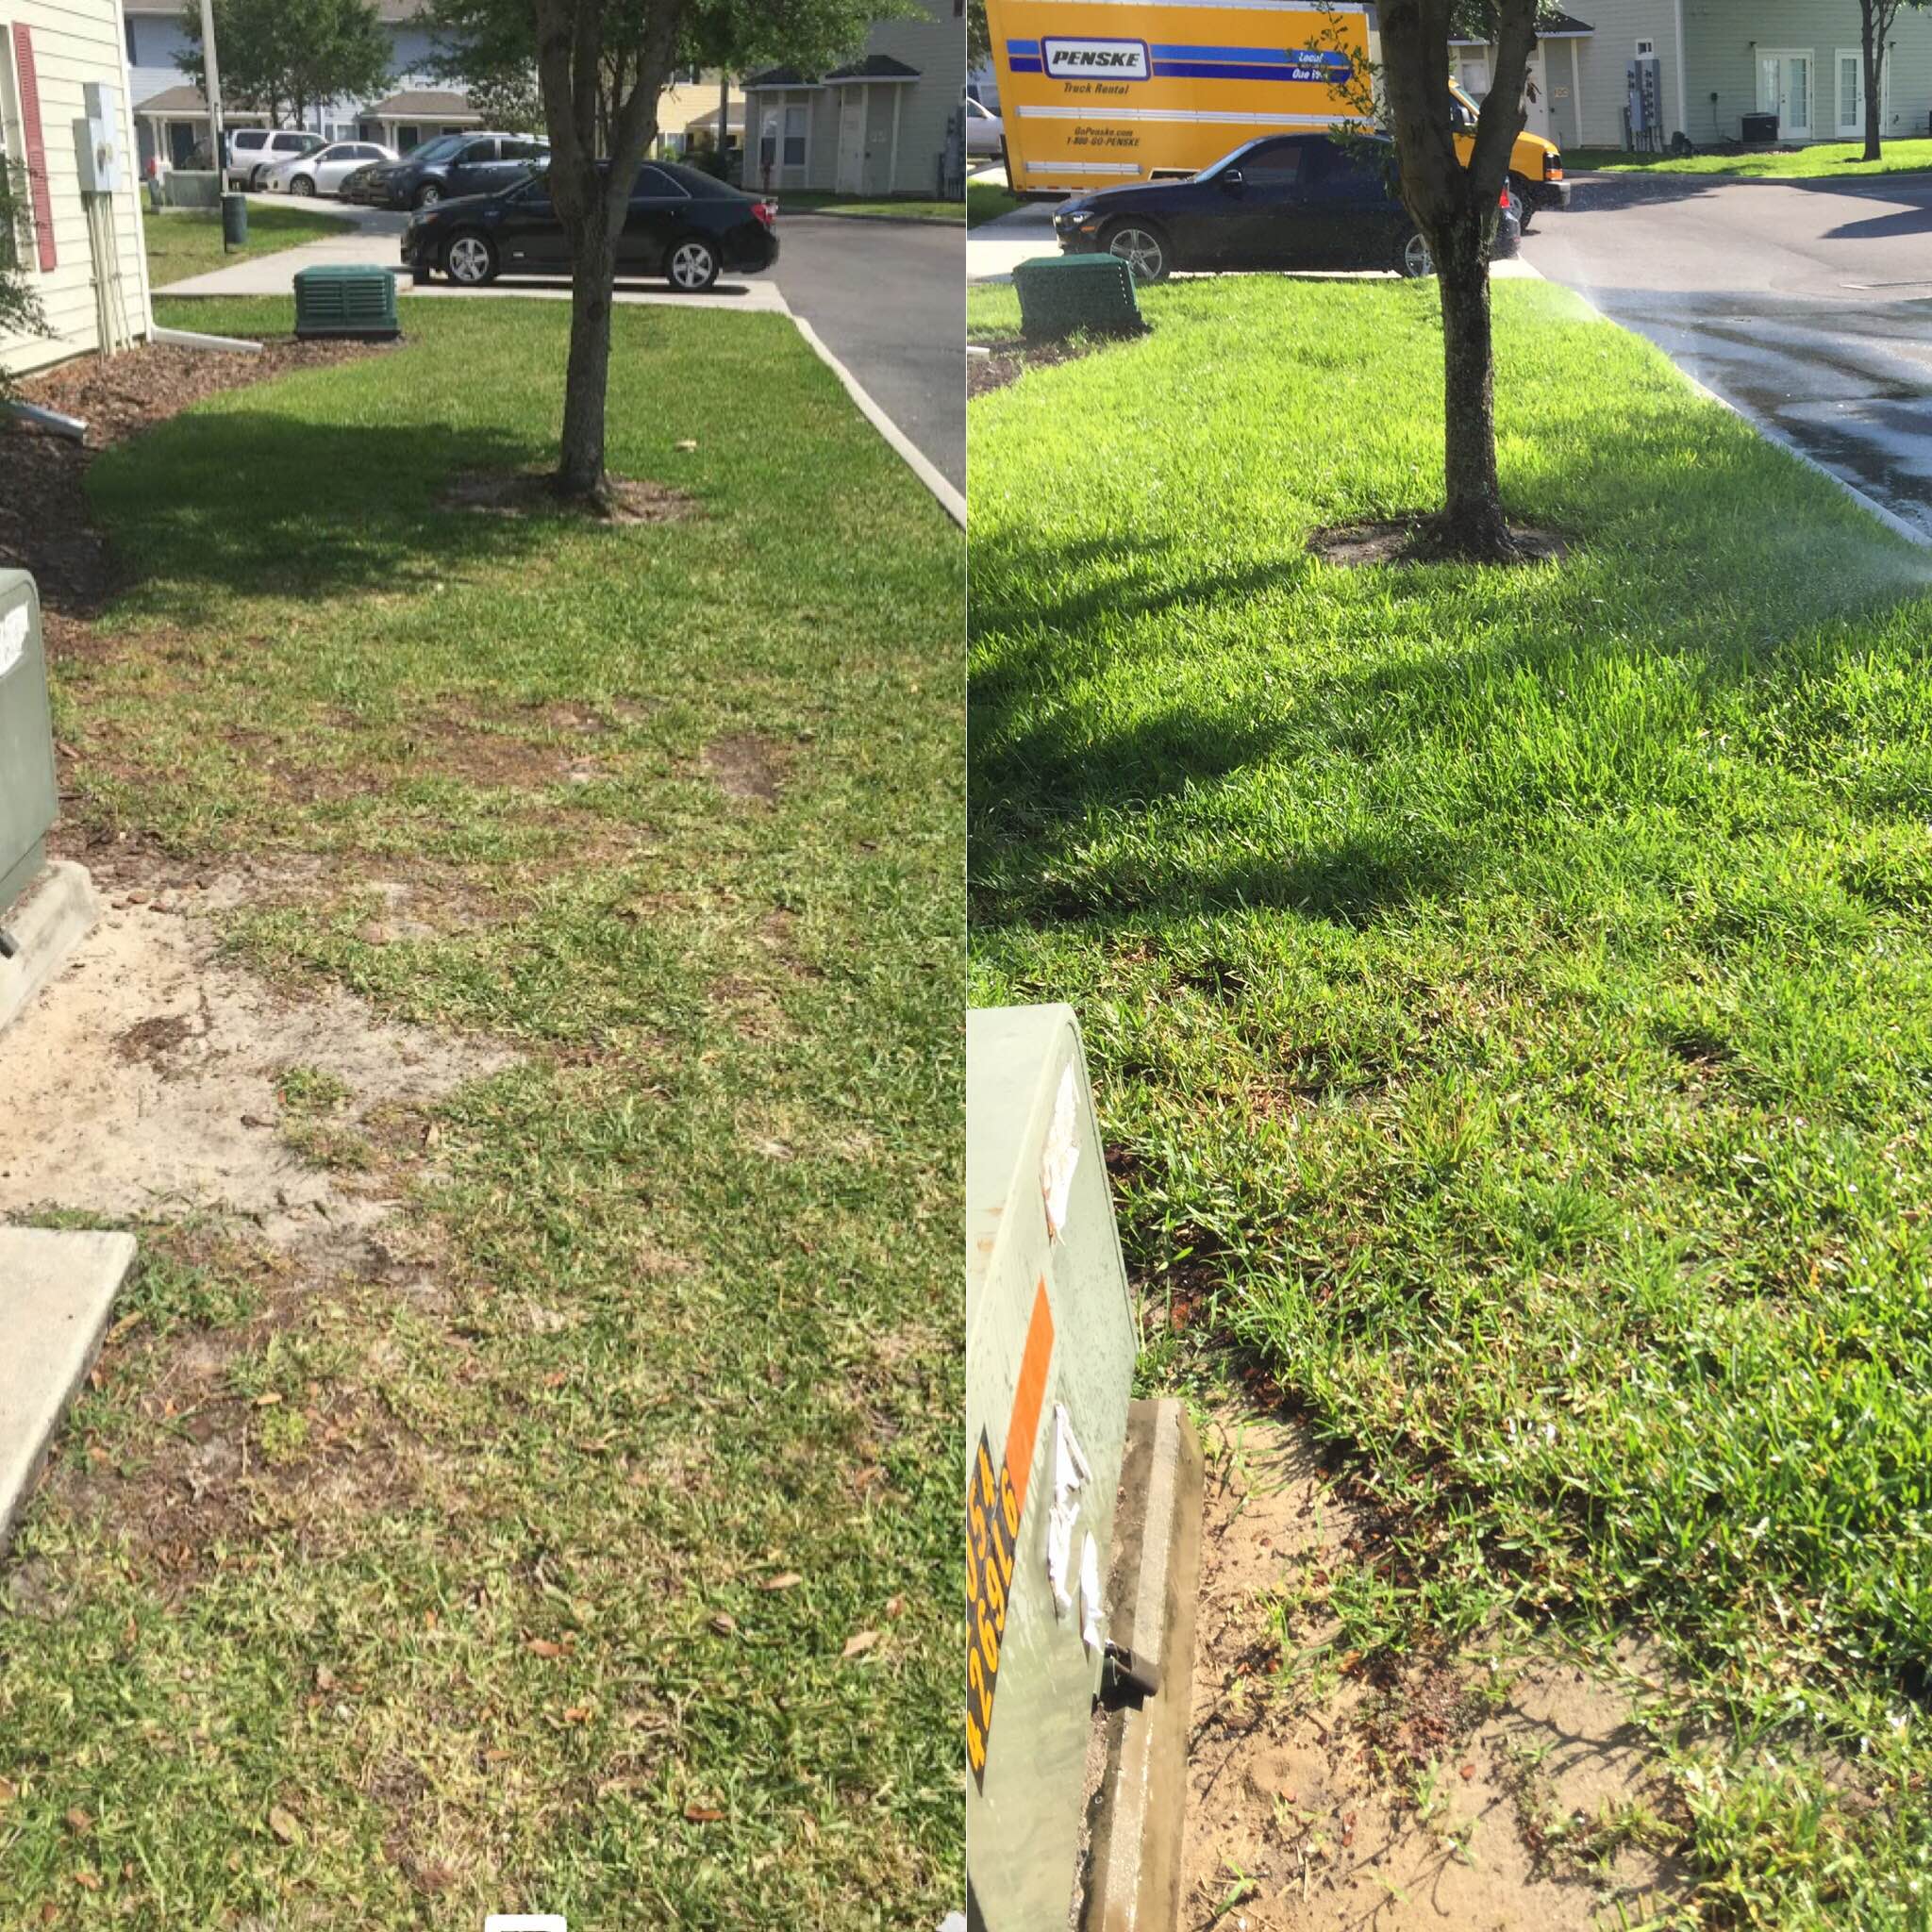 60 Days Lawn Treatment Results | The 